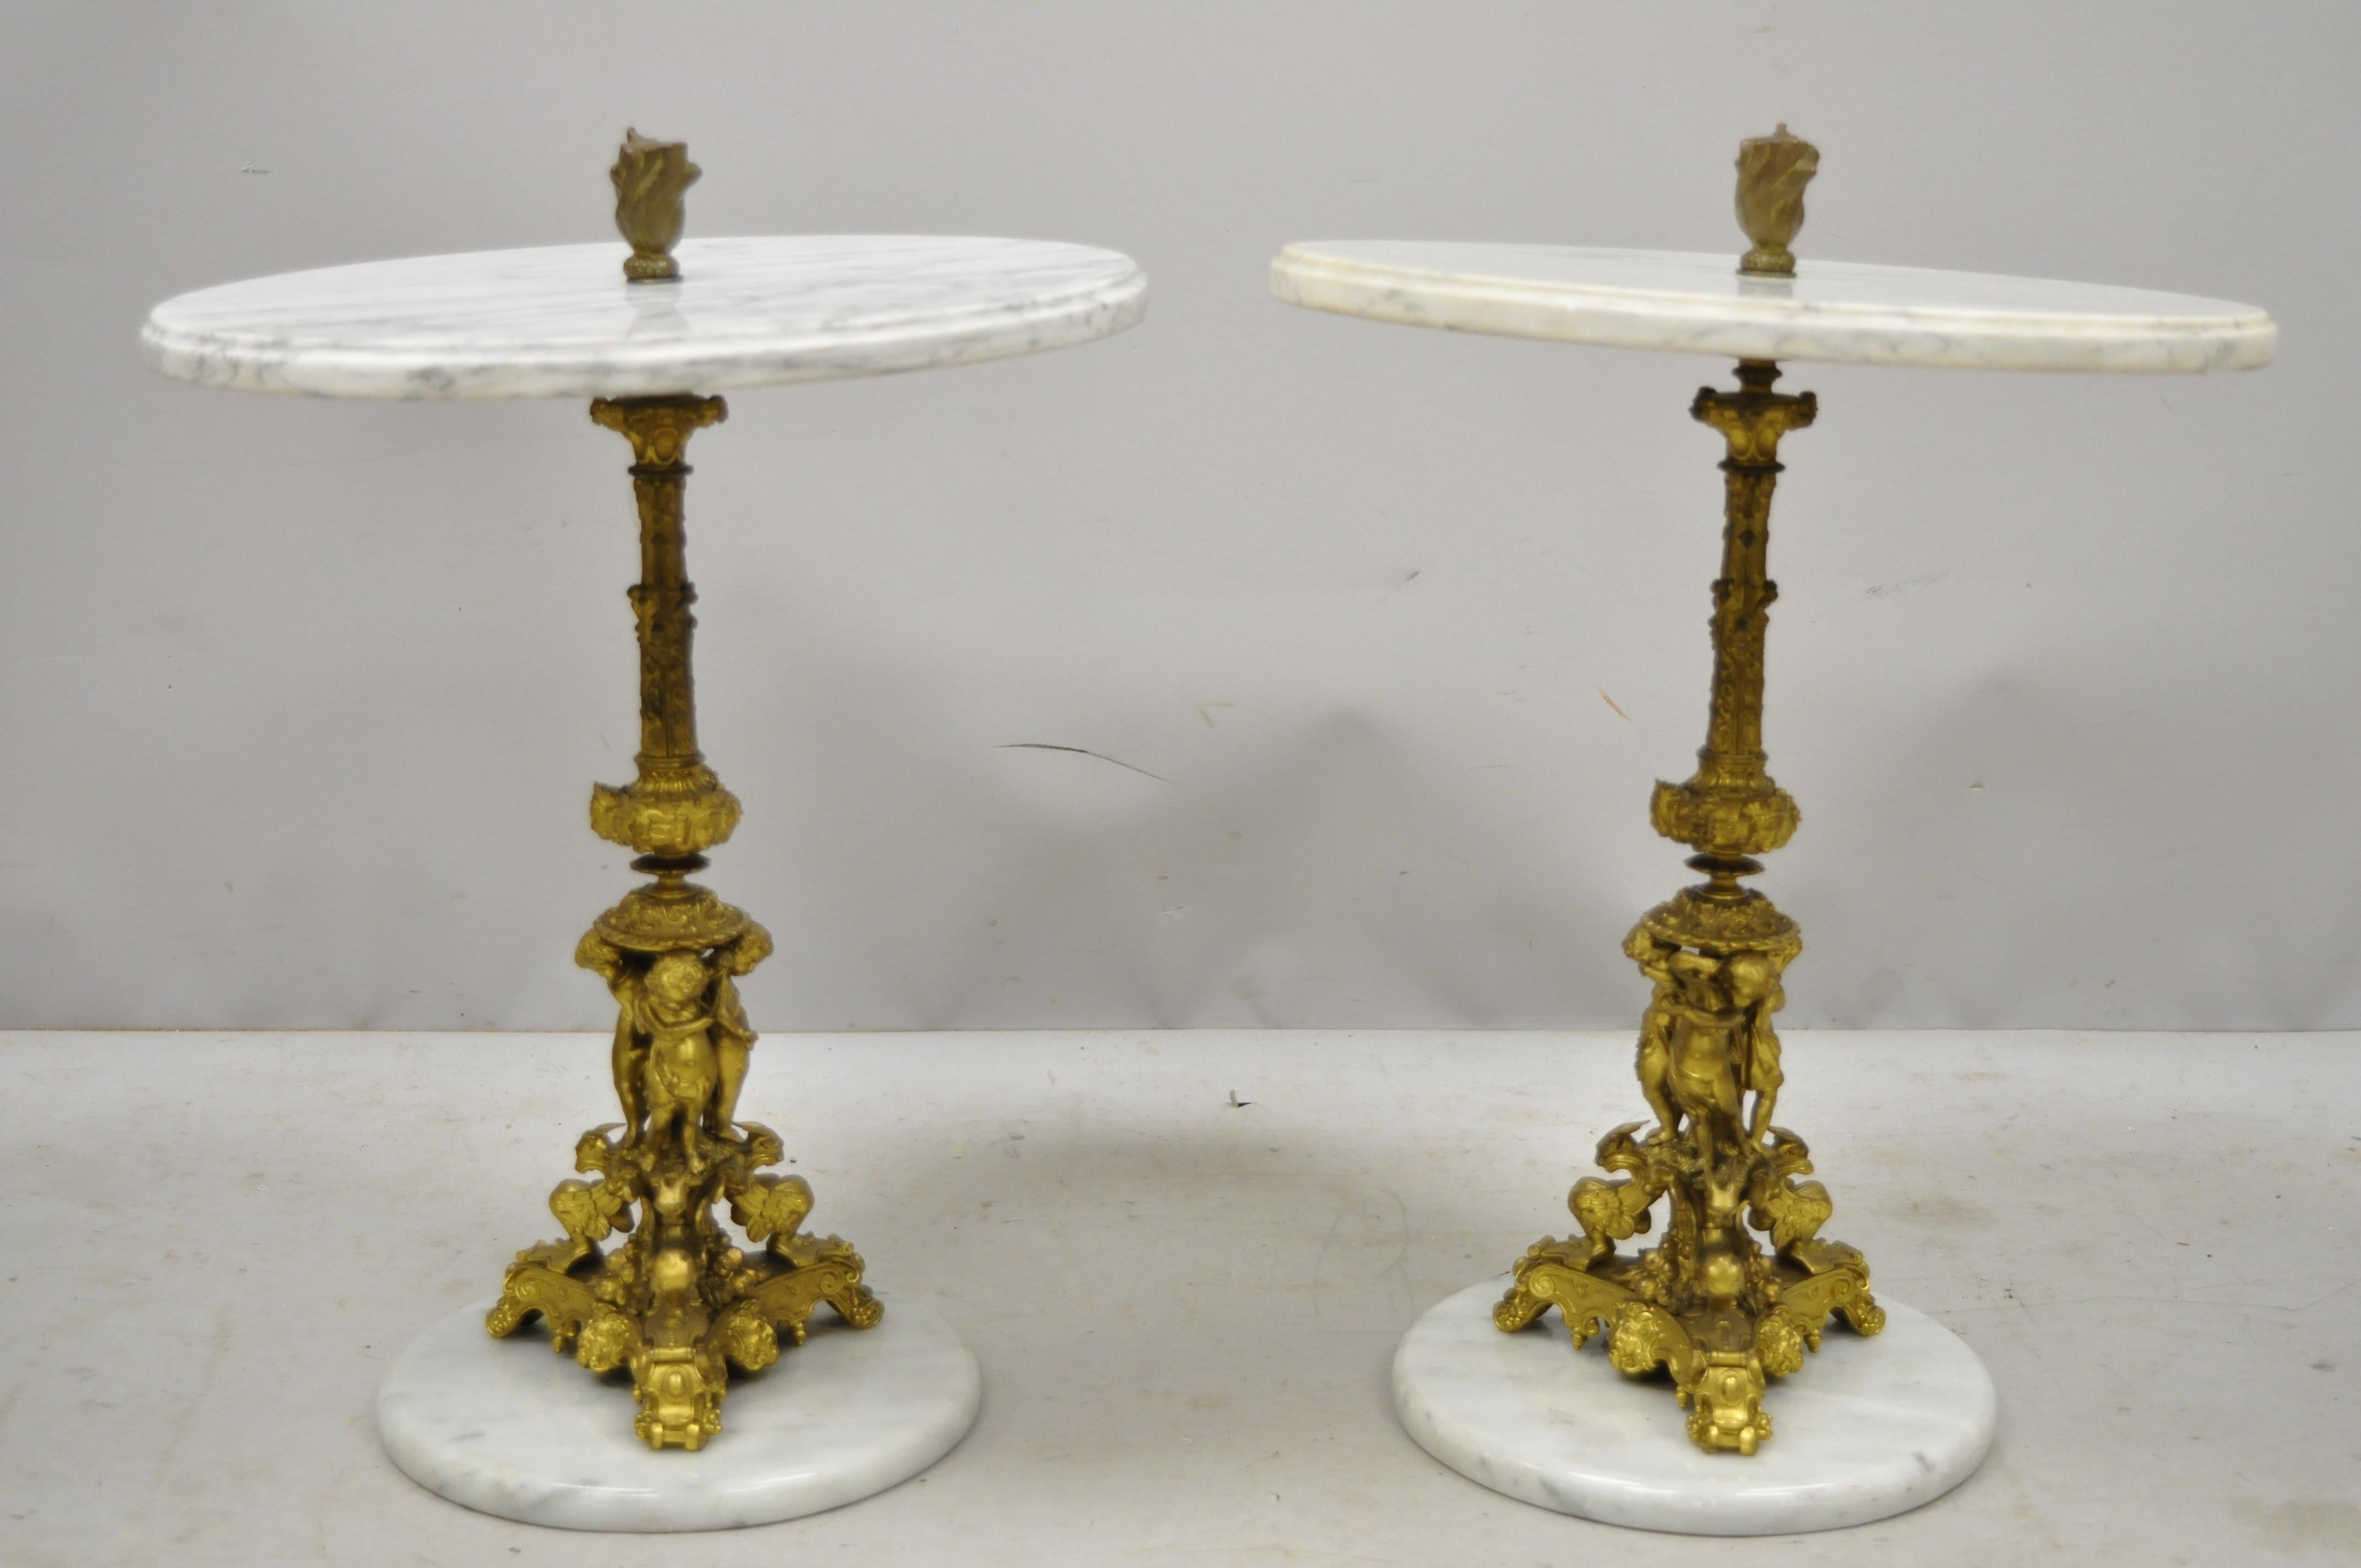 Pair of antique small bronze and marble figural Italian Renaissance side tables. Item features round marble top and base, cast bronze figural column supports of cherub musicians and various griffins and faces, nice small size, circa early 20th